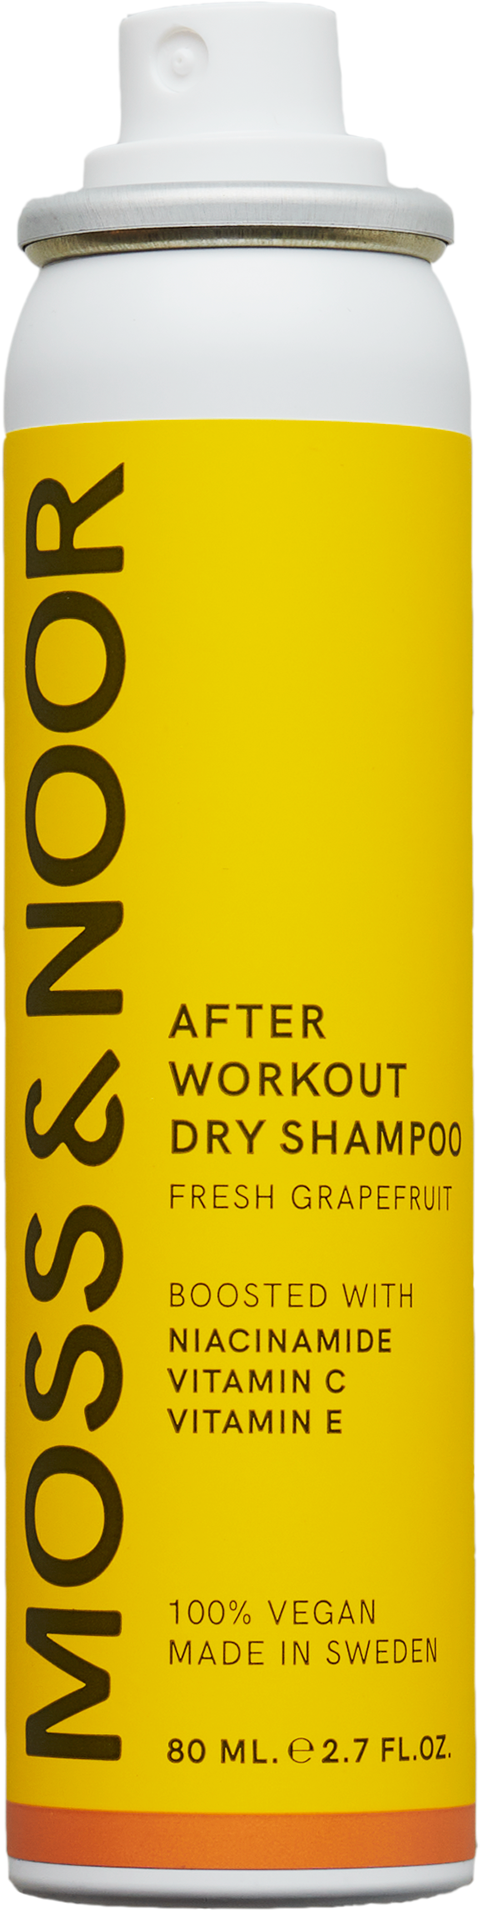 Moss & Noor After Workout Dry Shampoo Pocket Size 80 ml